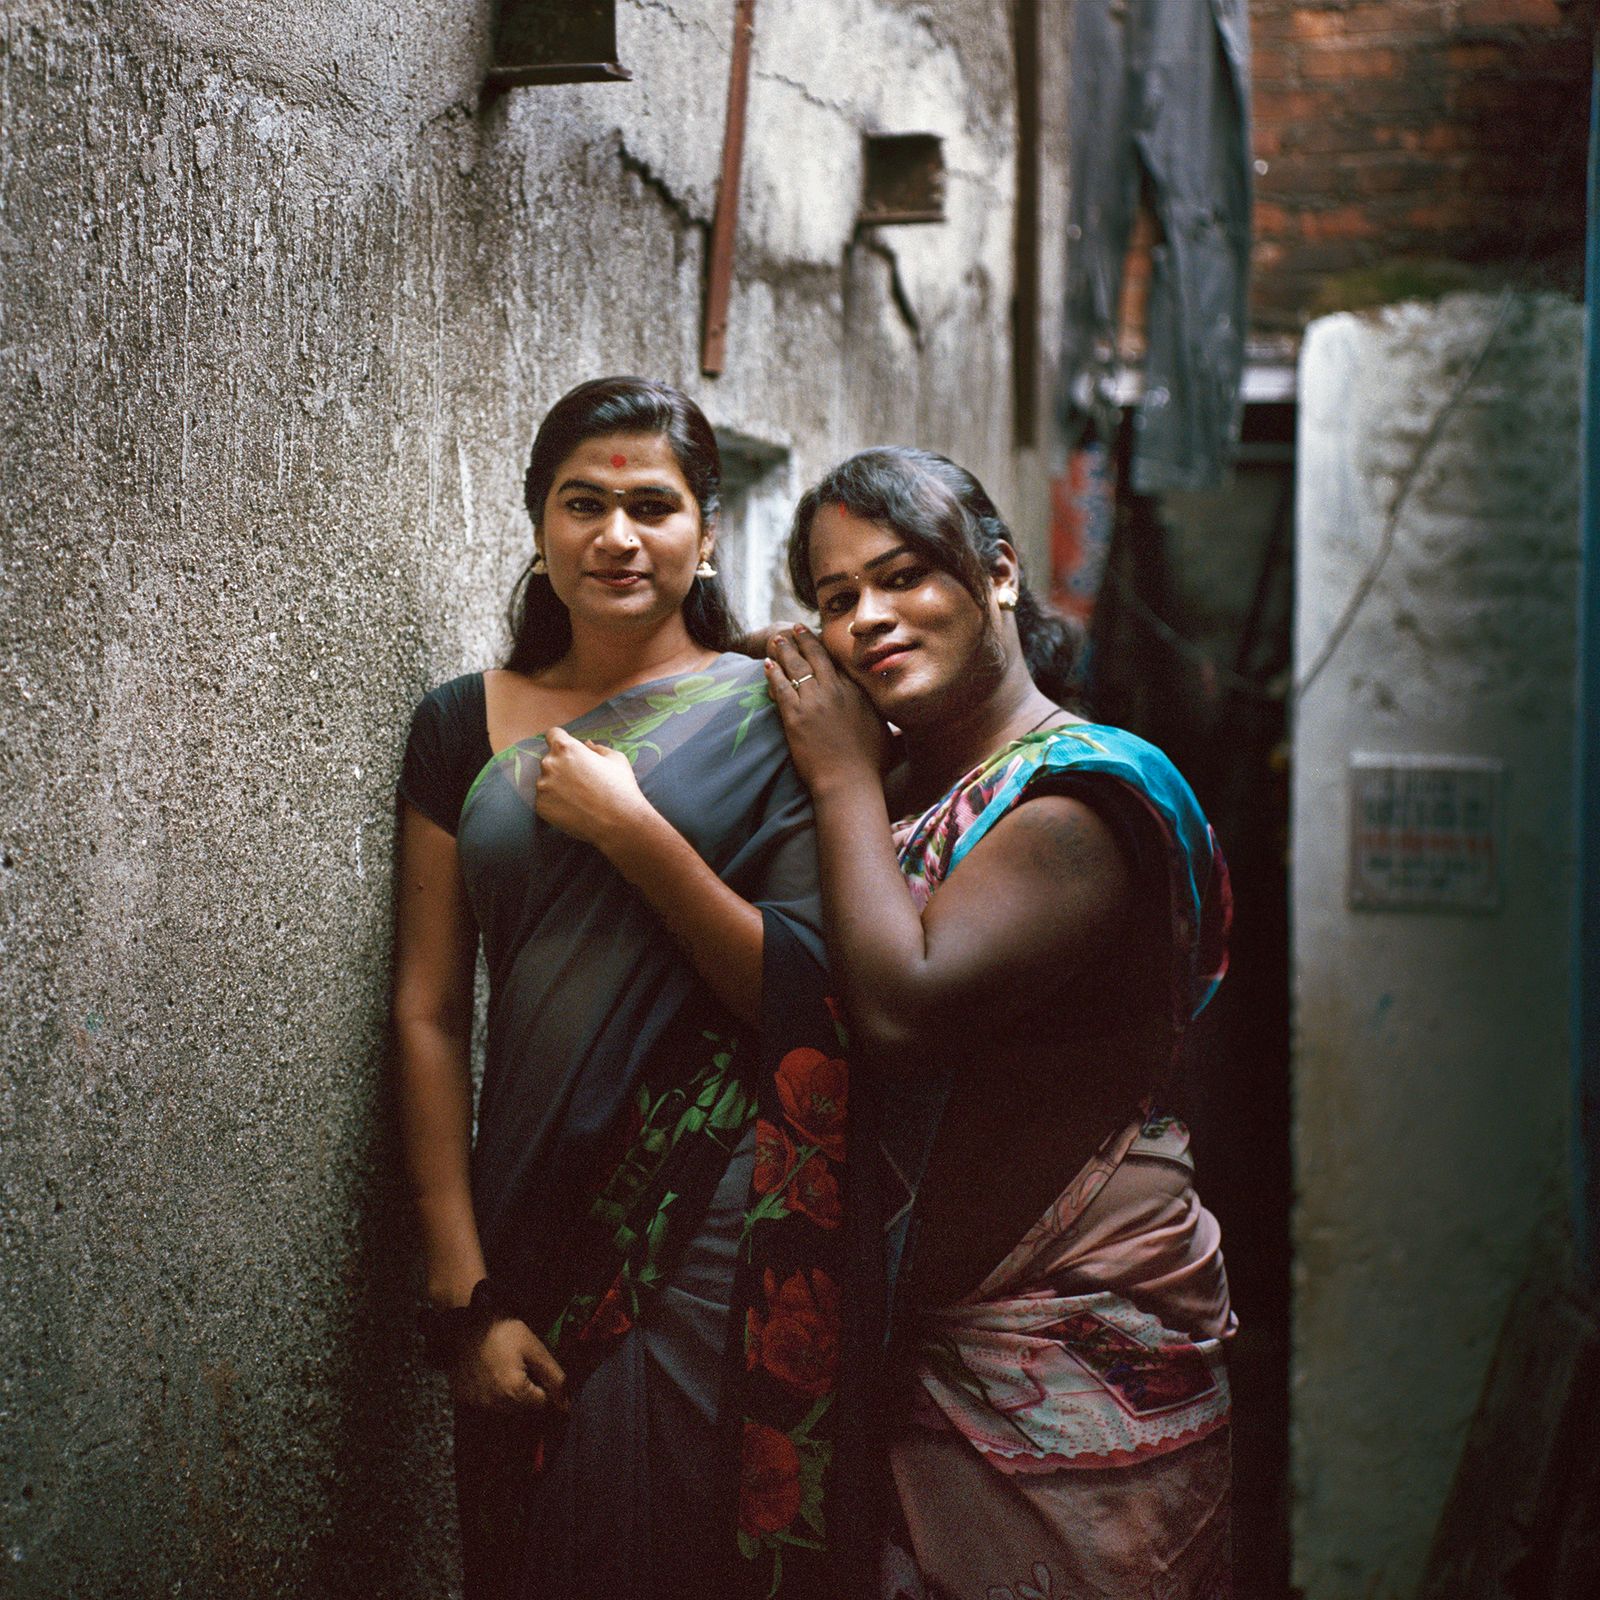 © Sara Hylton - Image from the The Demigods of India photography project